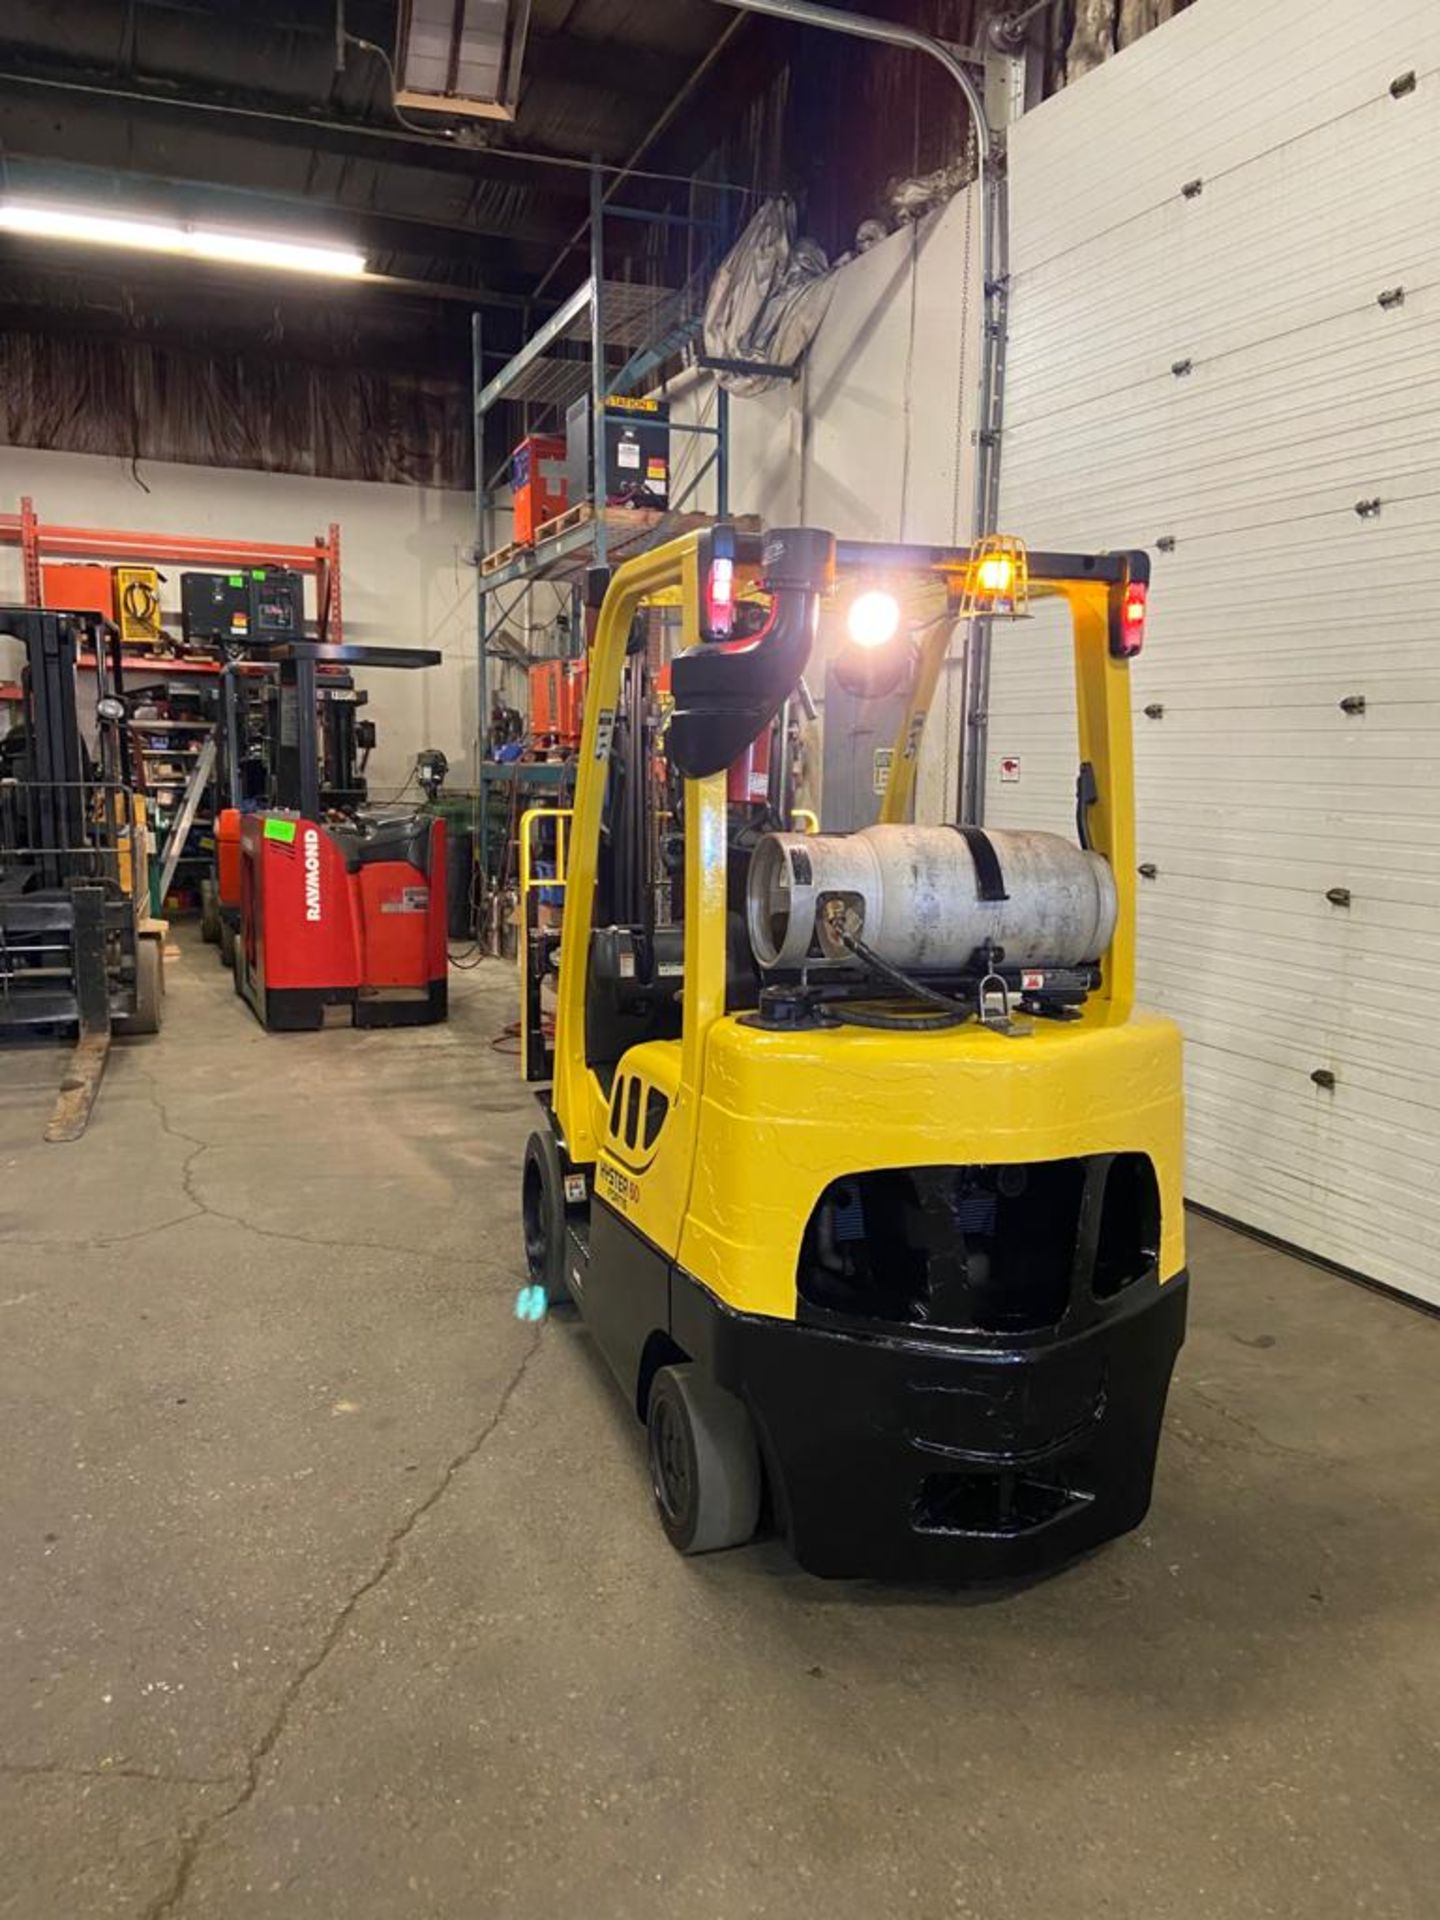 FREE CUSTOMS - 2016 Hyster 6000lbs Capacity Forklift LPG (propane) with 3-STAGE MAST (propane tank - Image 3 of 3